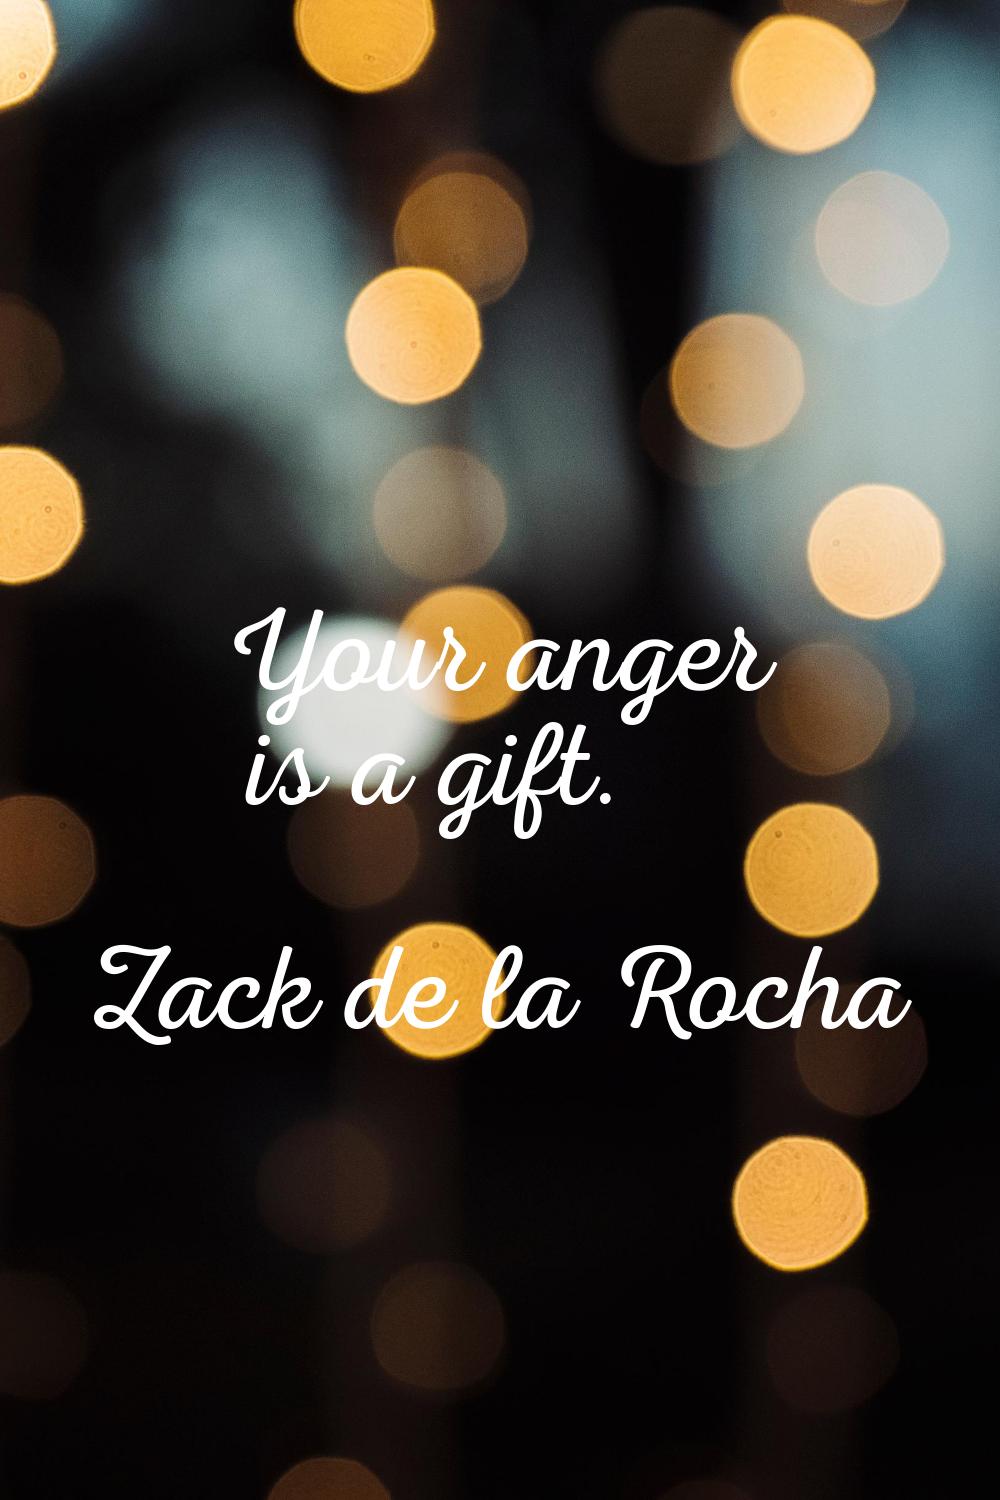 Your anger is a gift.